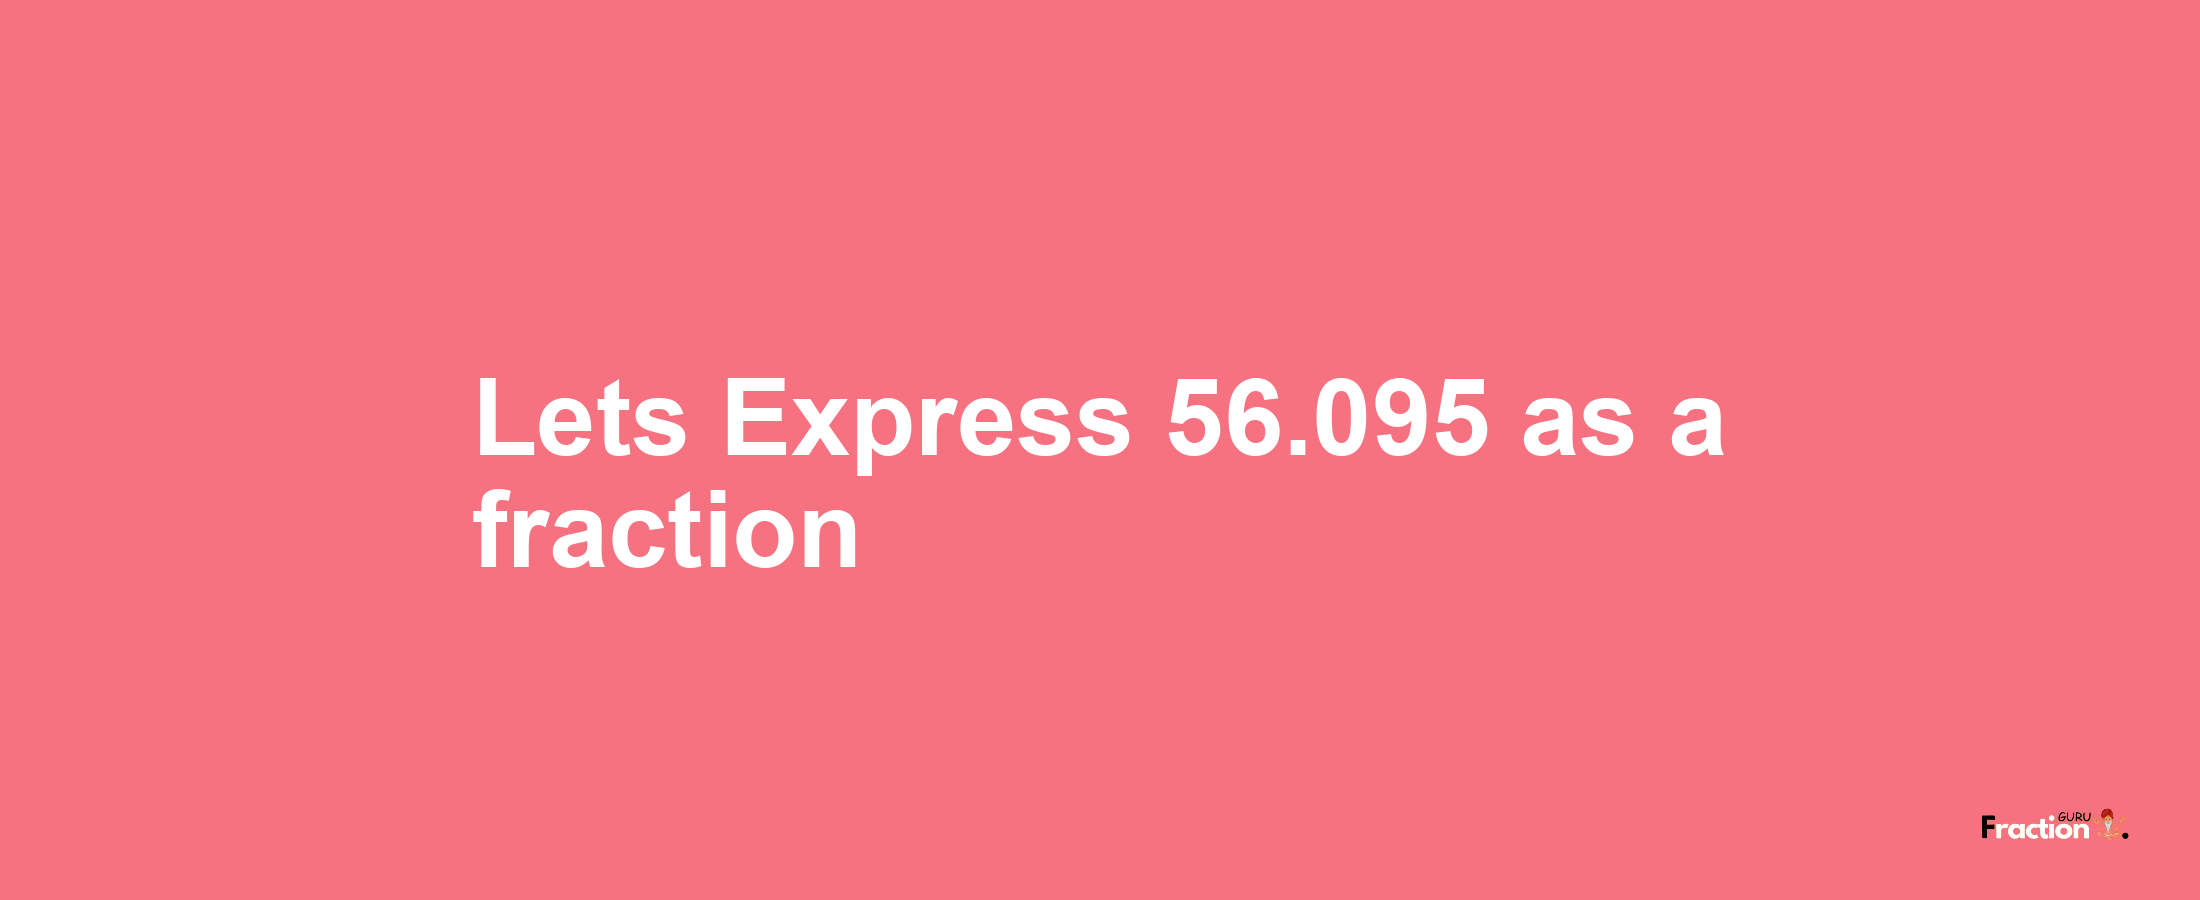 Lets Express 56.095 as afraction